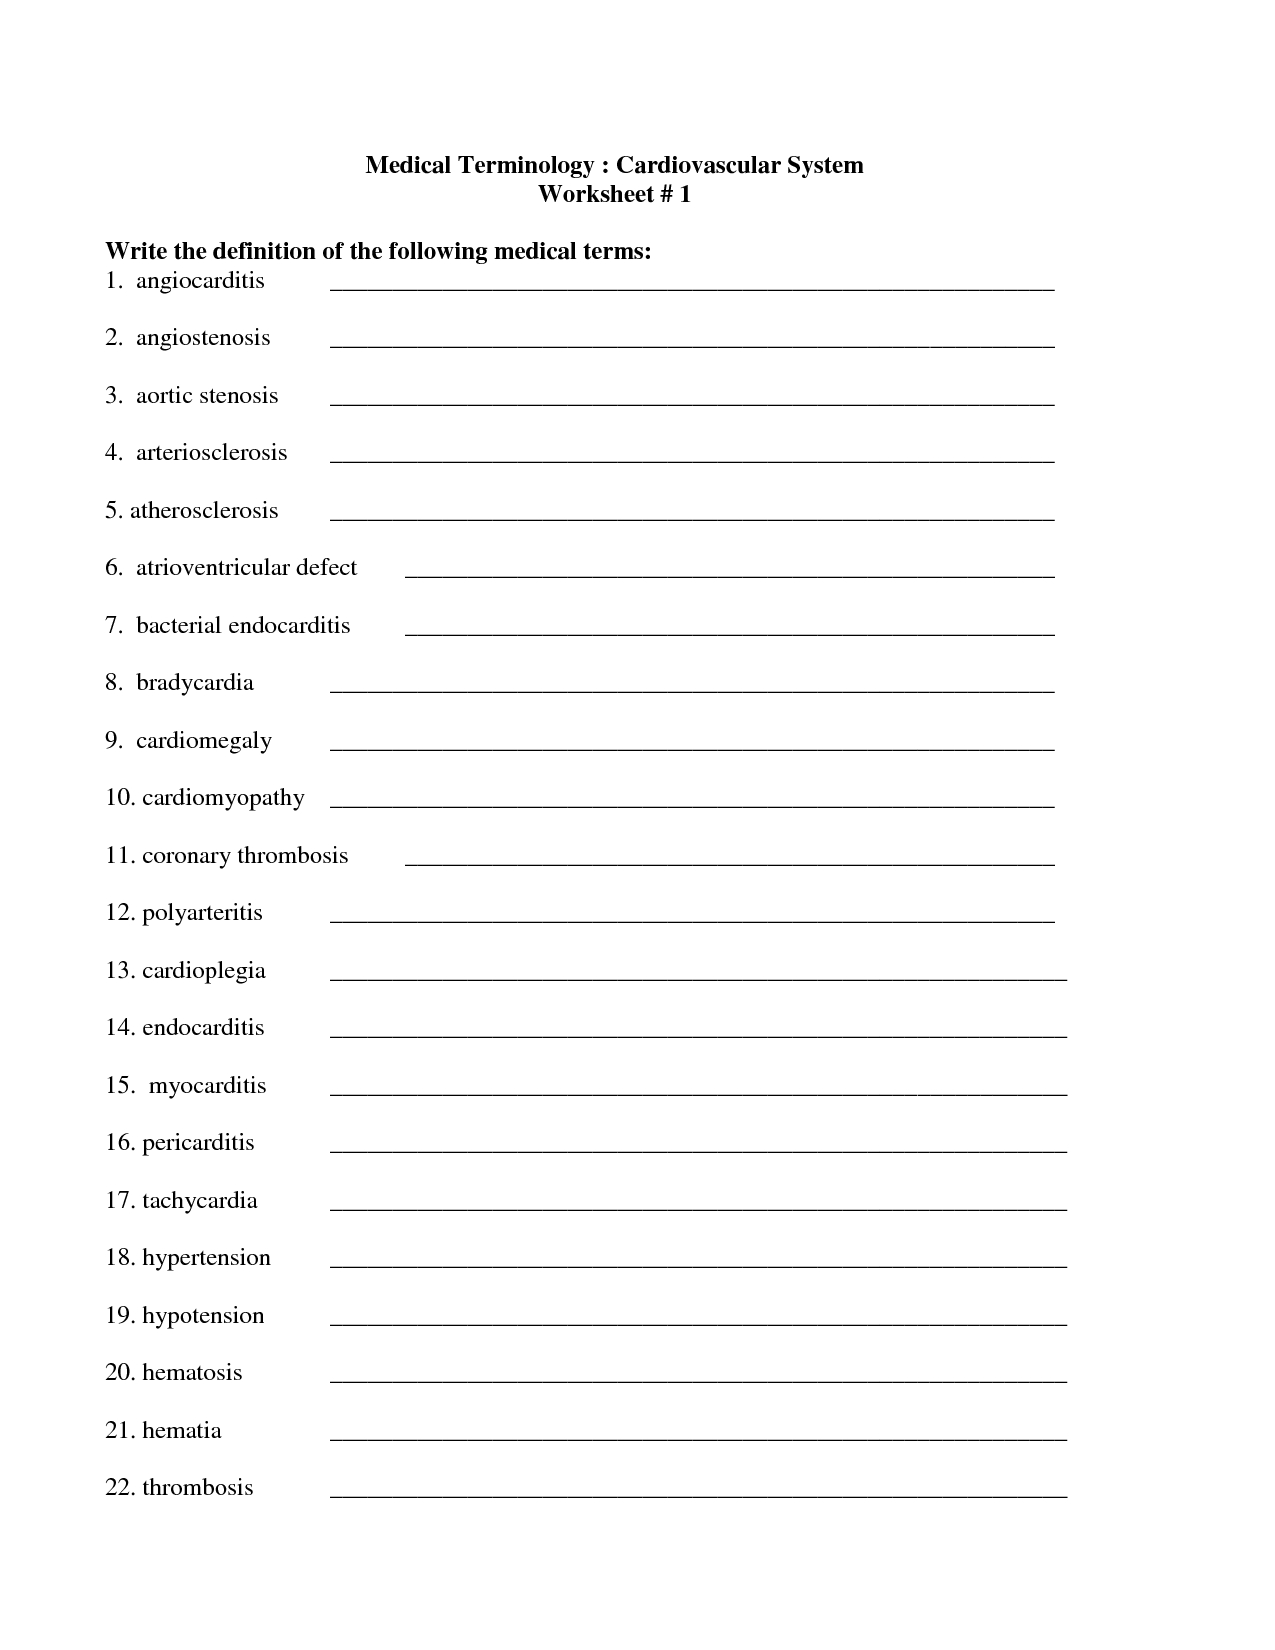 free cna test questions